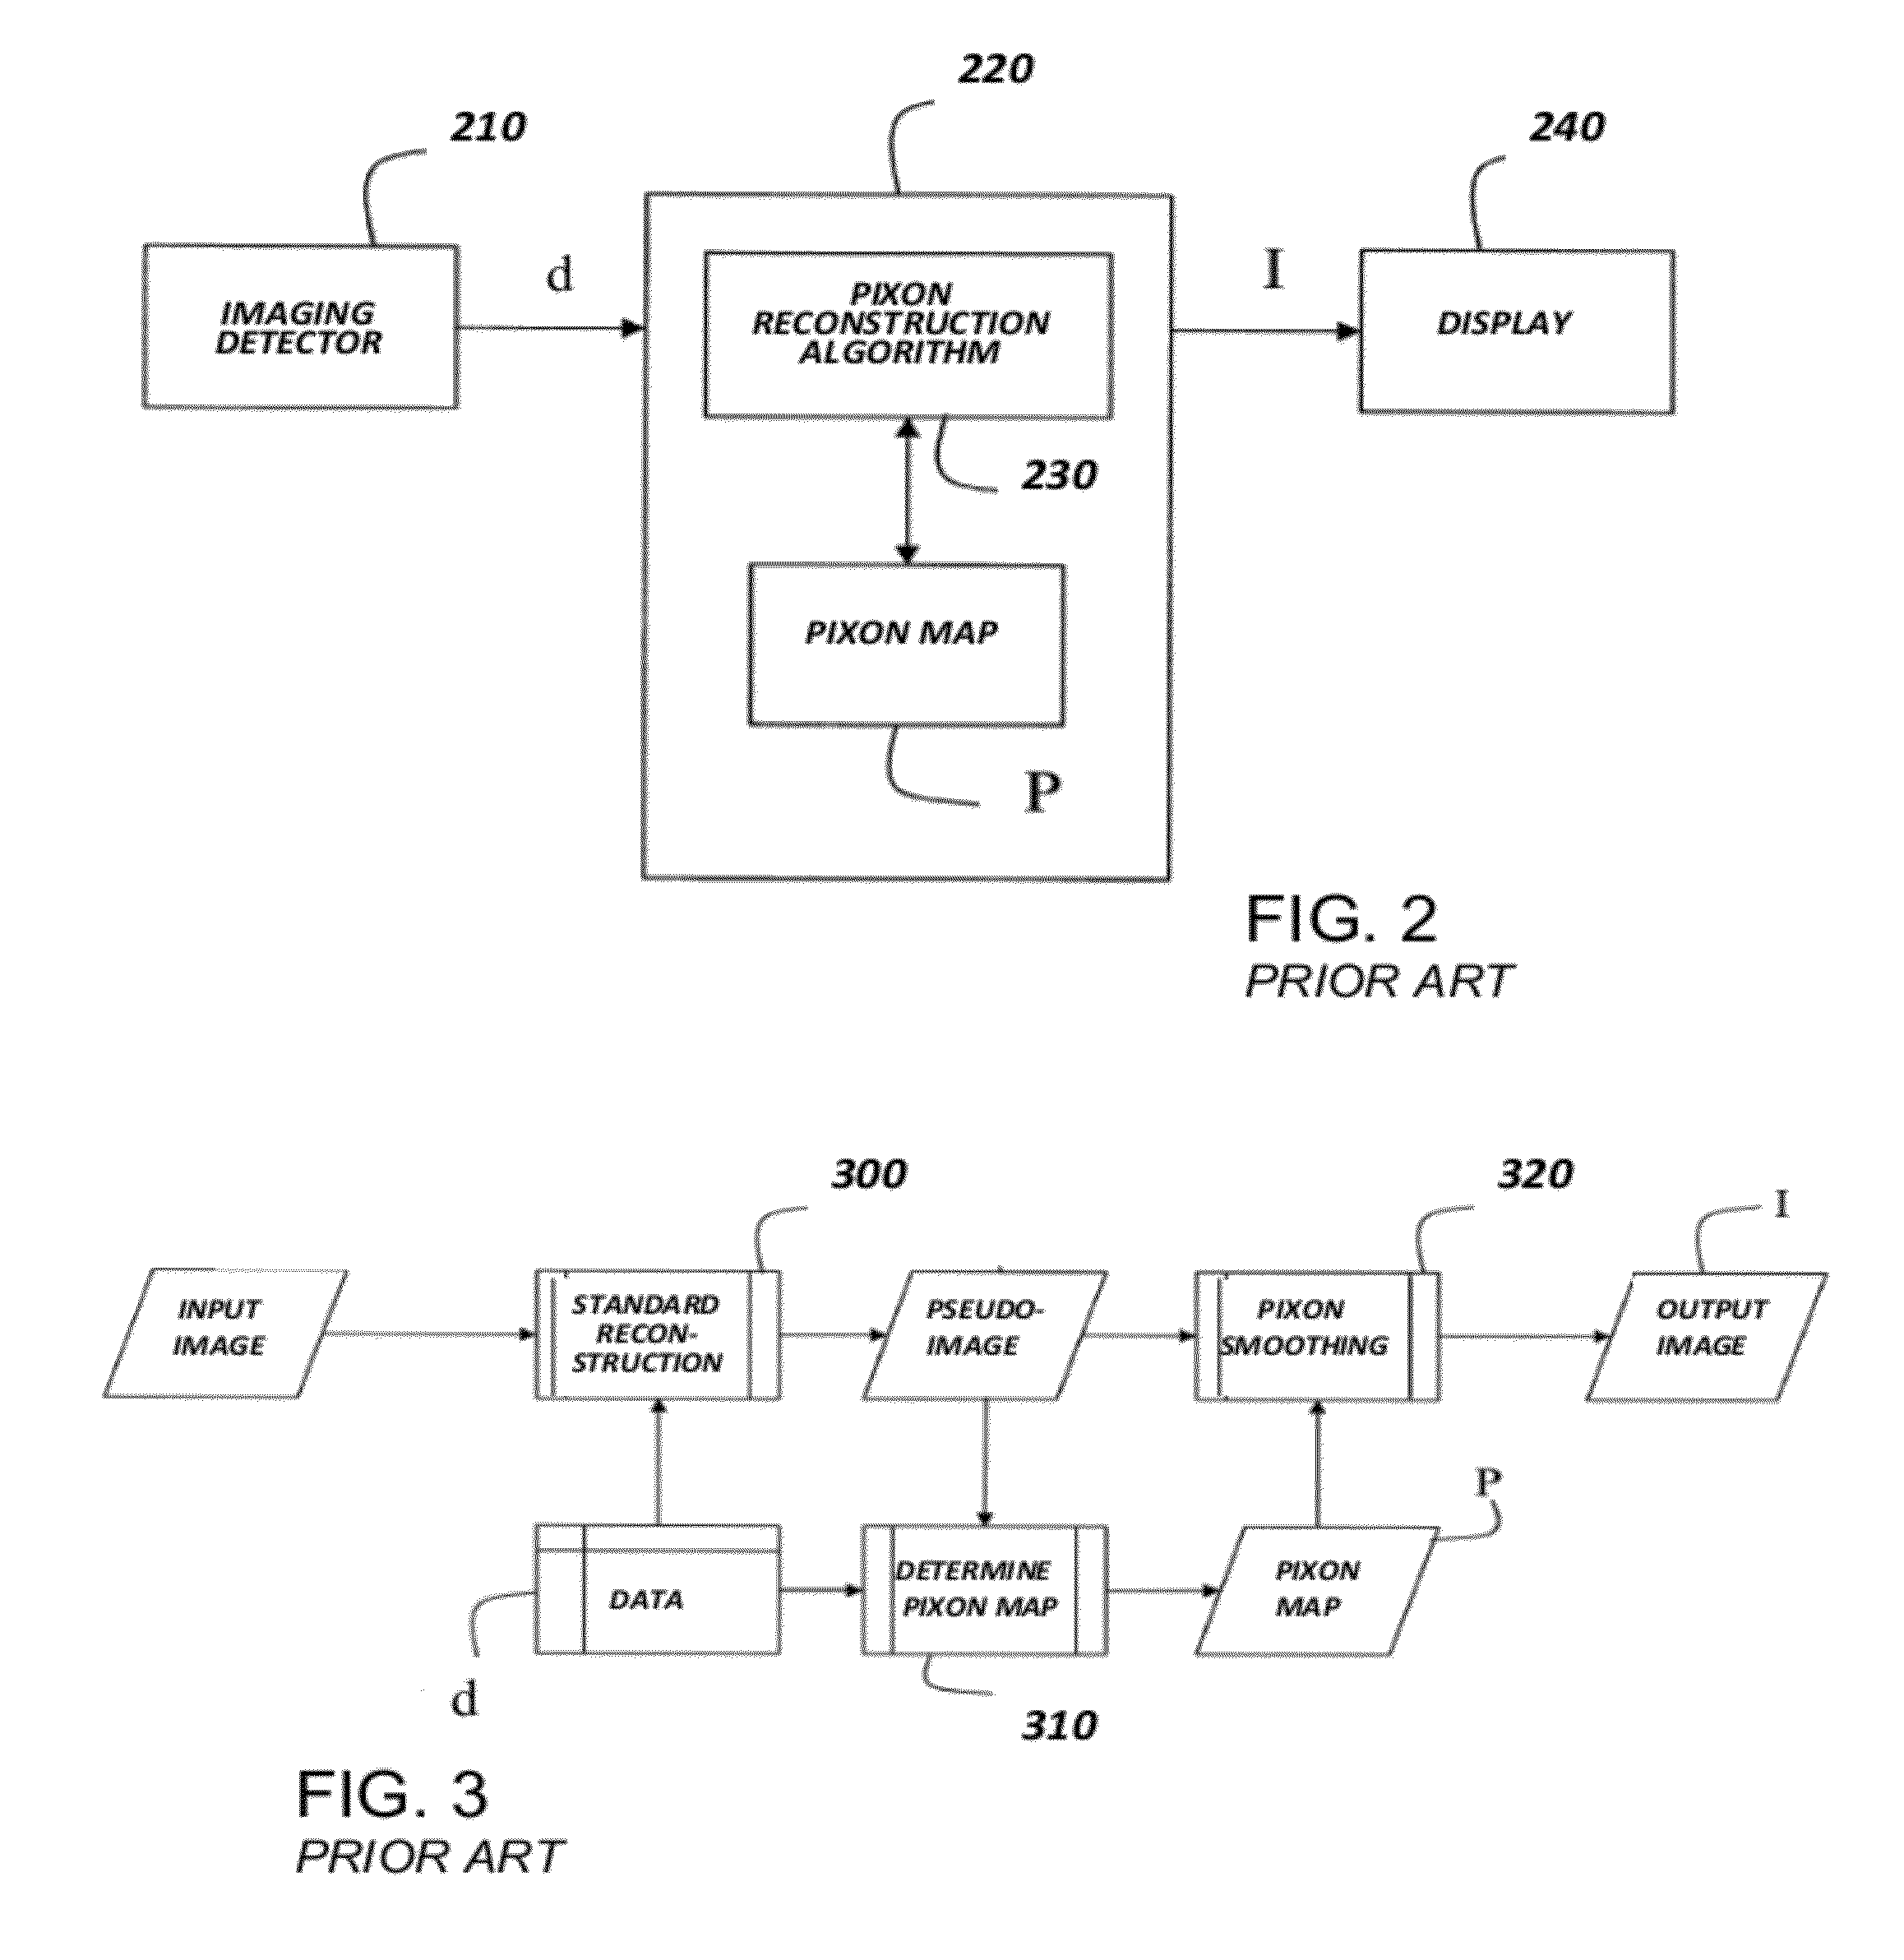 Method to Determine A Pixon Map in Interactive Image Reconstruction and Spectral Analysis